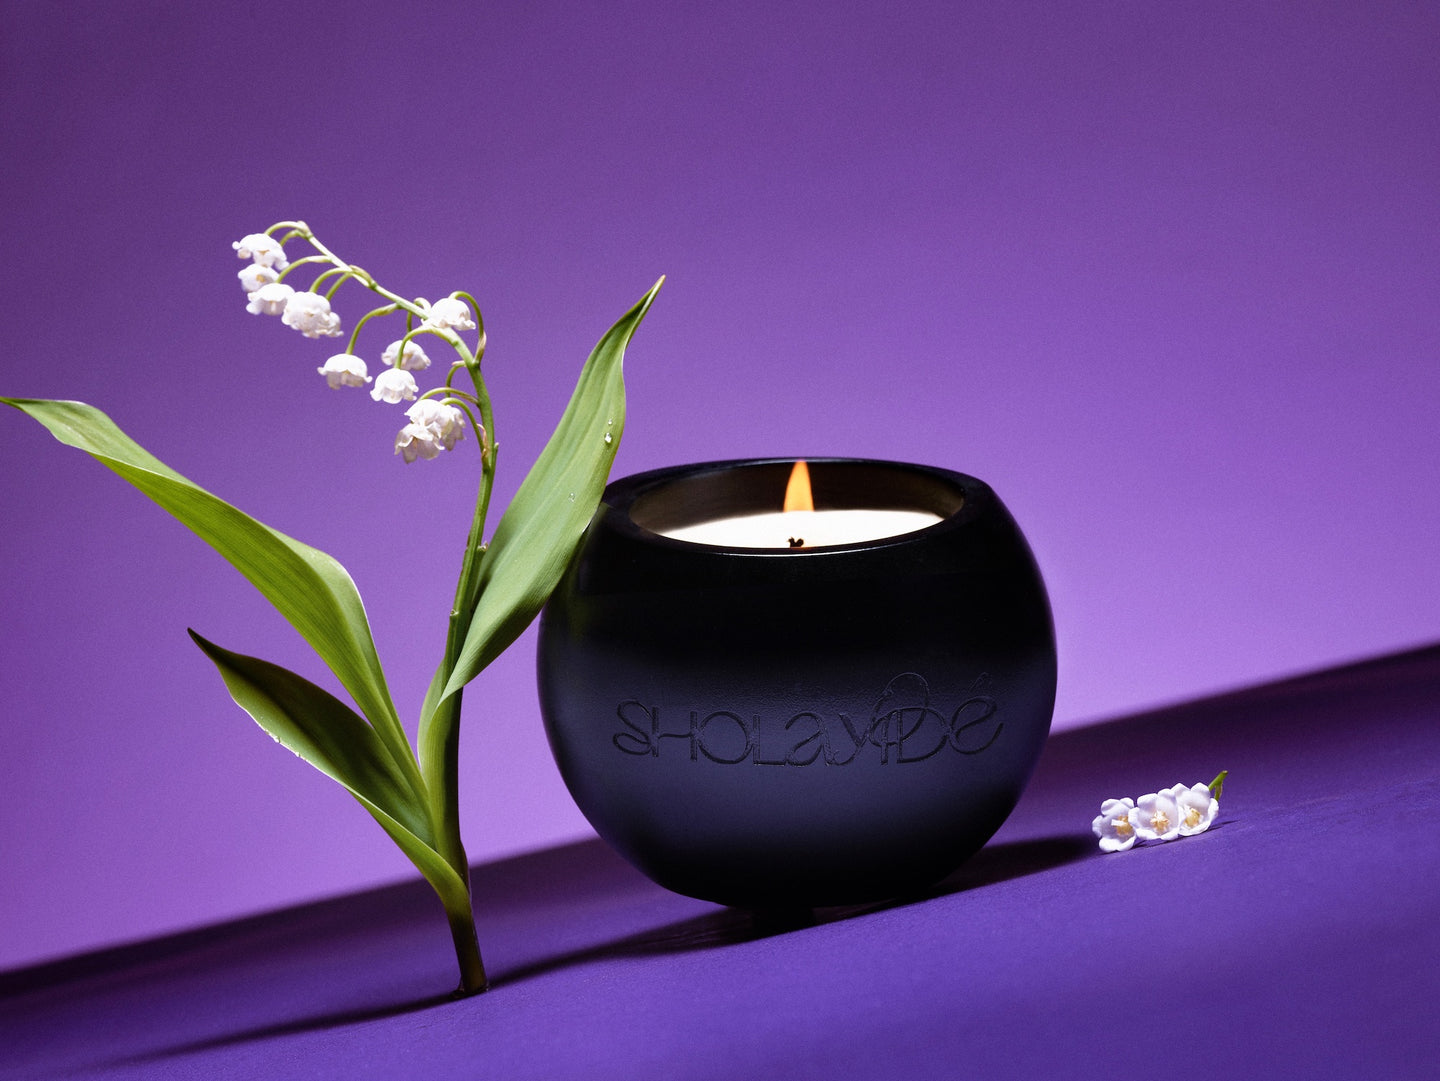 FAVORED Vegan Candle -  Rejuvenating auras fill your home of springtime bliss with the feminine scent of Lily of the Valley.